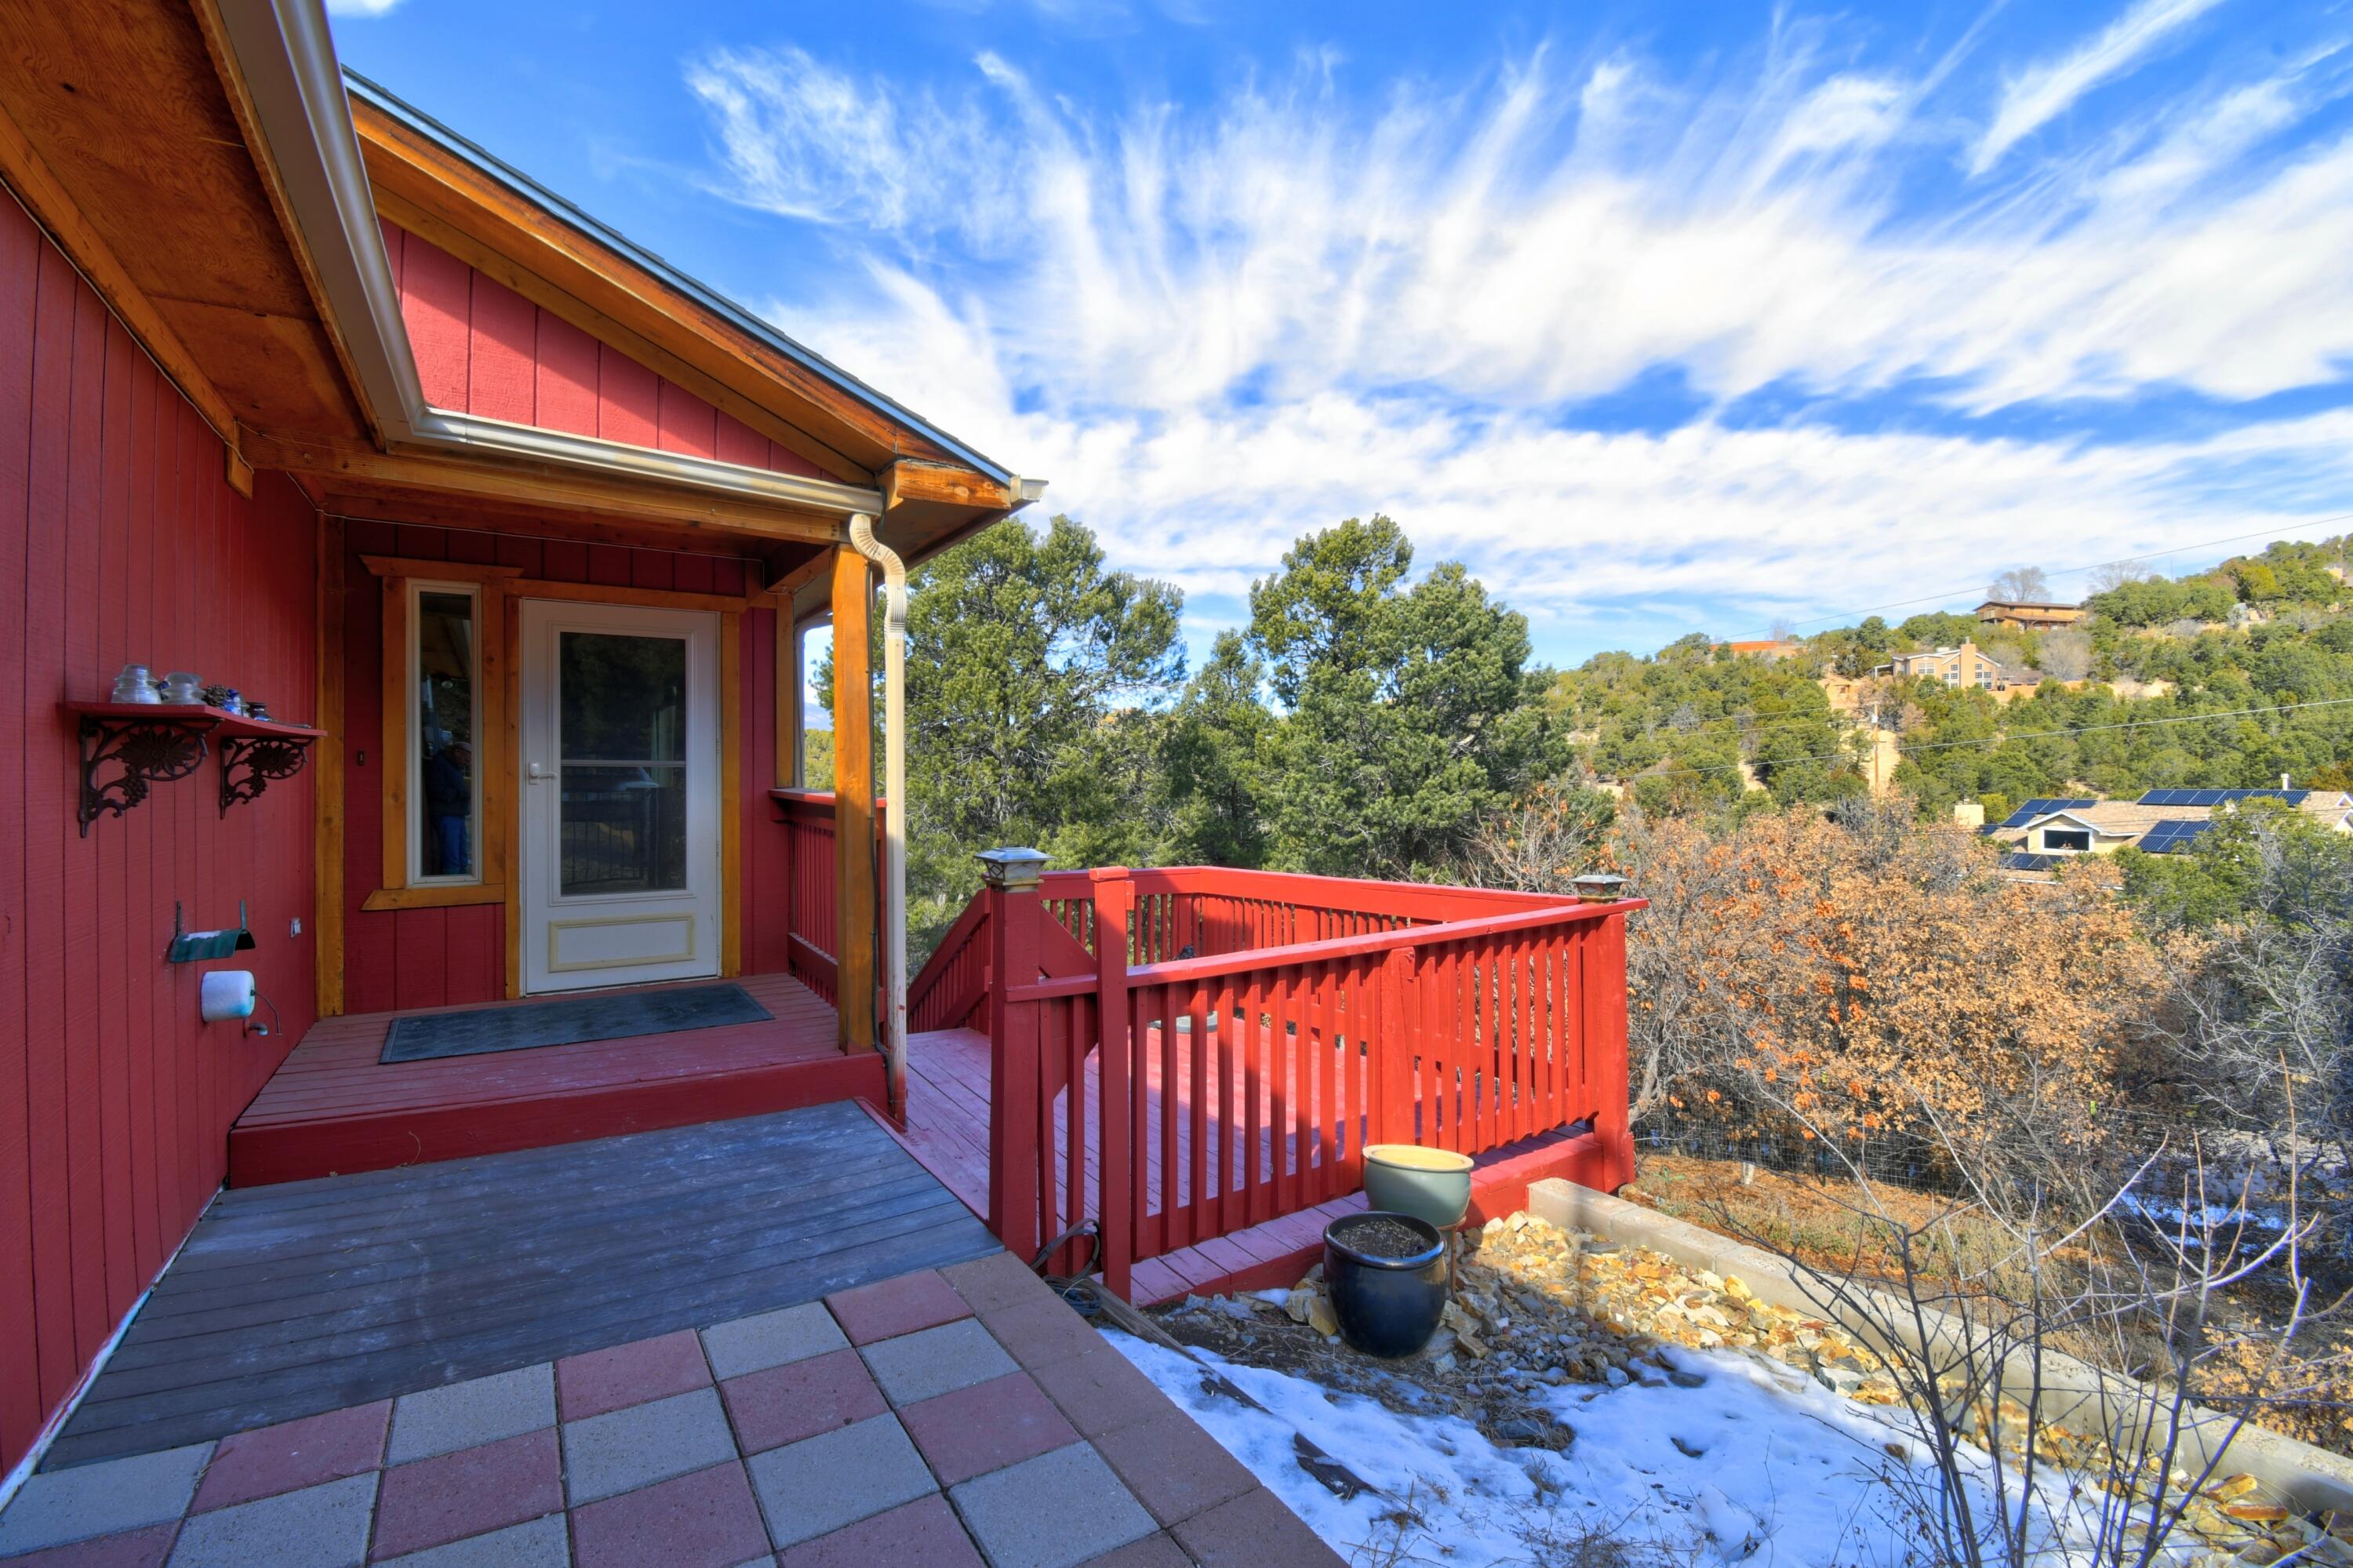 Great Mountain Home! Unsurpassed Views from the Front Deck! National Forest Just Around the Corner -Hike Forever!  Only 15 Minutes to Albuquerque on all Paved Roads. Roof was replaced in 2019, Newer Furnace and Refrigerated Air was added at the same time! Woodstove for chilly Winter Days.  Wonderful Covered Deck on the Back of the Home, just off of the Kitchen- enjoy year round! Large Main Bedroom has oversized walkin shower. Home has a fenced backyard and an unfinished basement for storage.  Two-car attached garage makes taking in the groceries a breeze!  If you are looking for an East Mountain Home, close to Albuquerque, this home is for you - it has been lovingly cared for throughout the years!